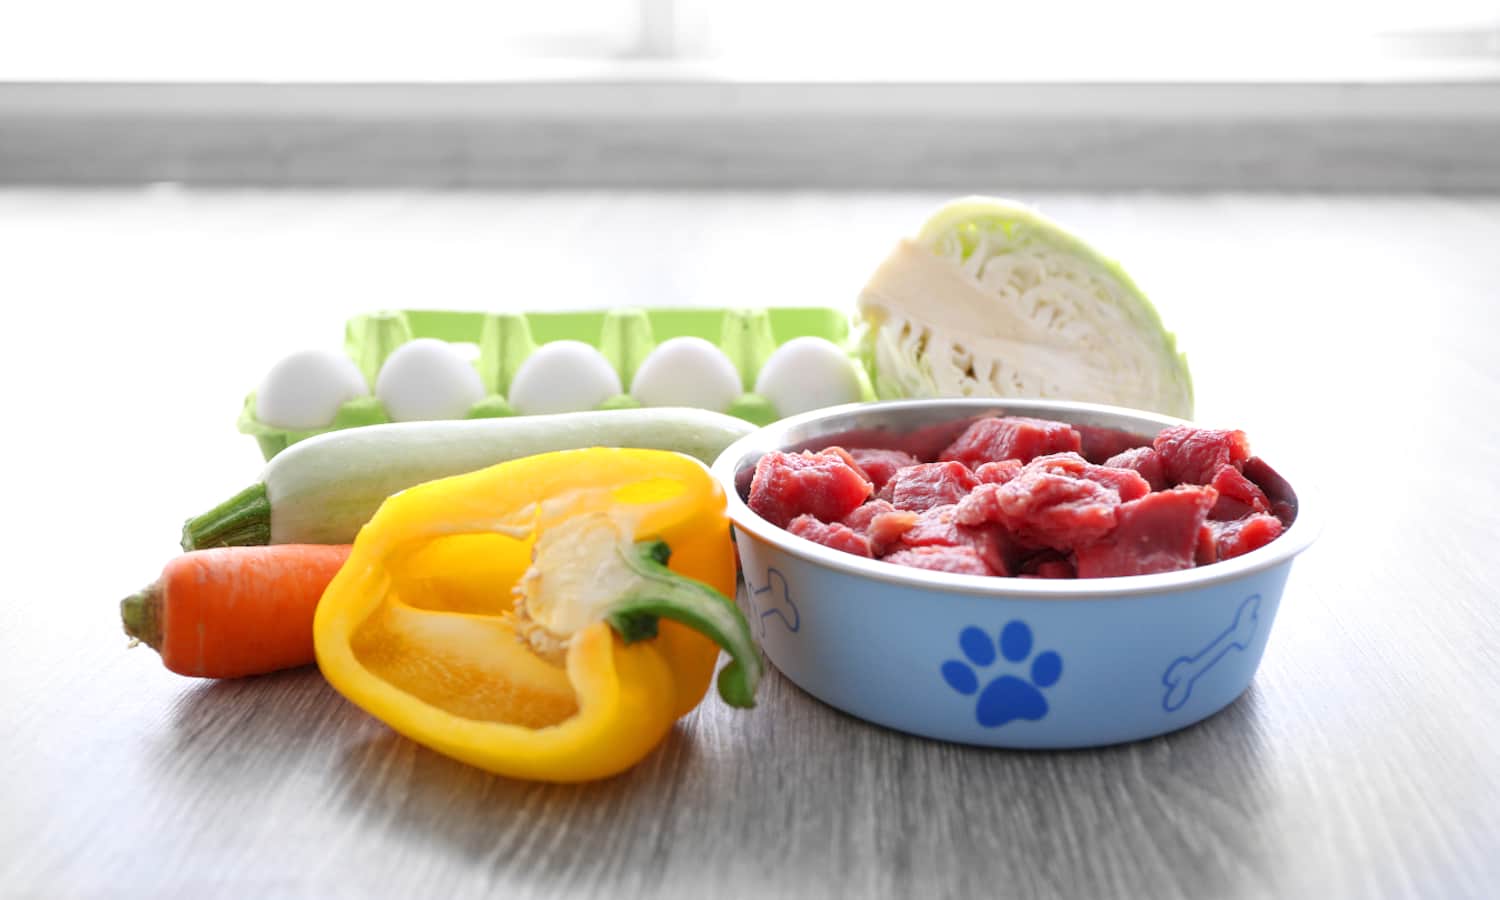 Innovative pet treats developed through a partnership between Treasure8 and Shameless Pets may help reduce food waste and provide a nutrient dense way to spoil our pets.